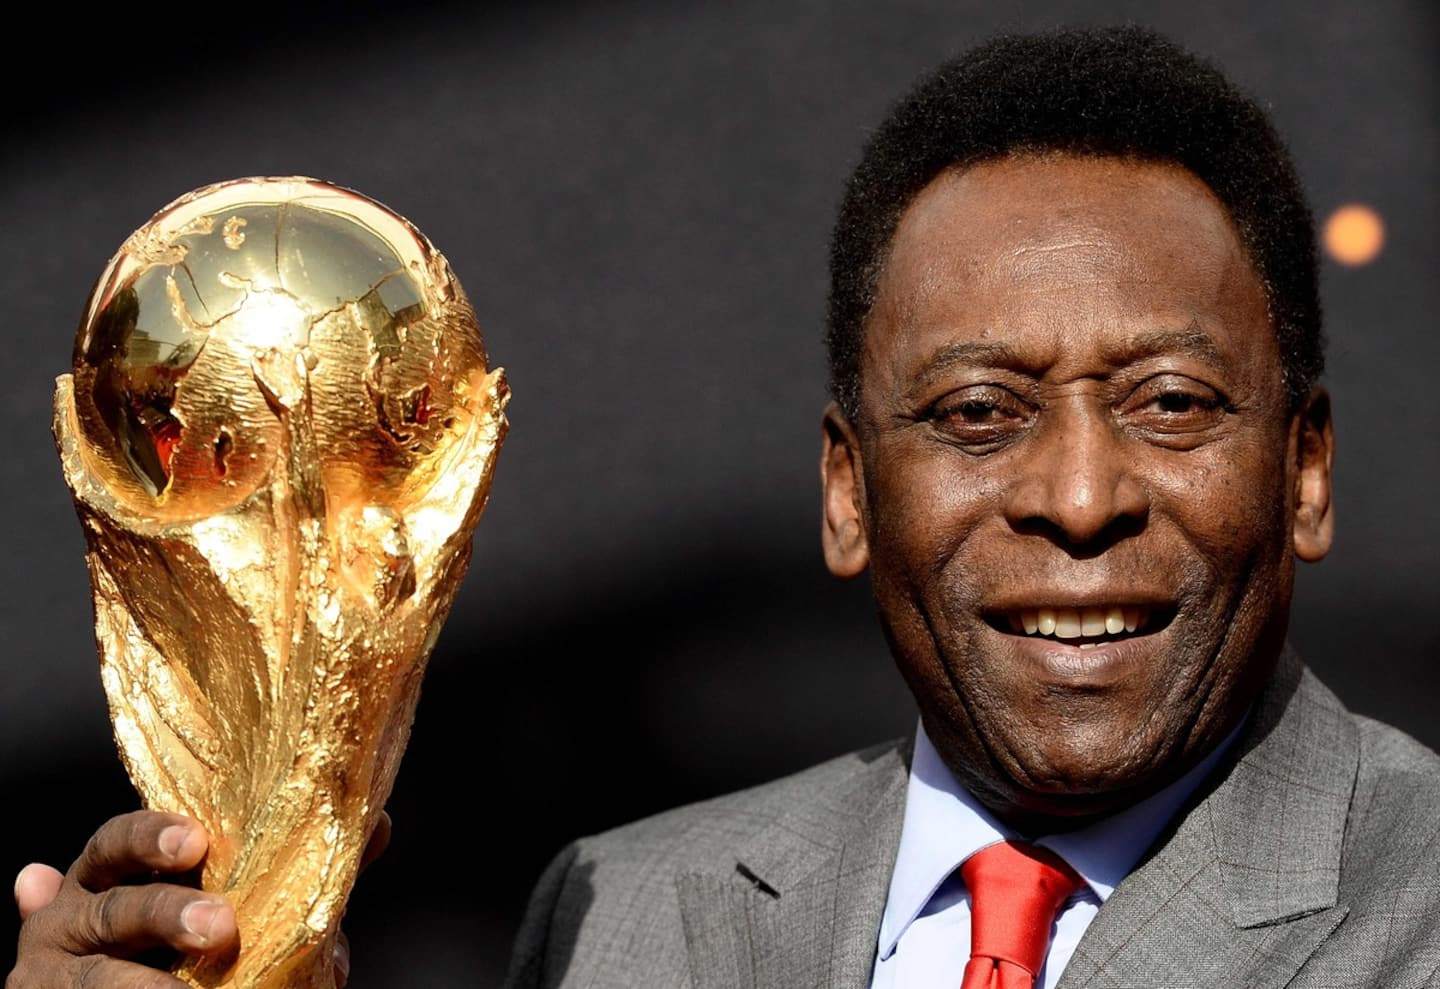 The "King" Pelé, the world's first soccer star, is dead